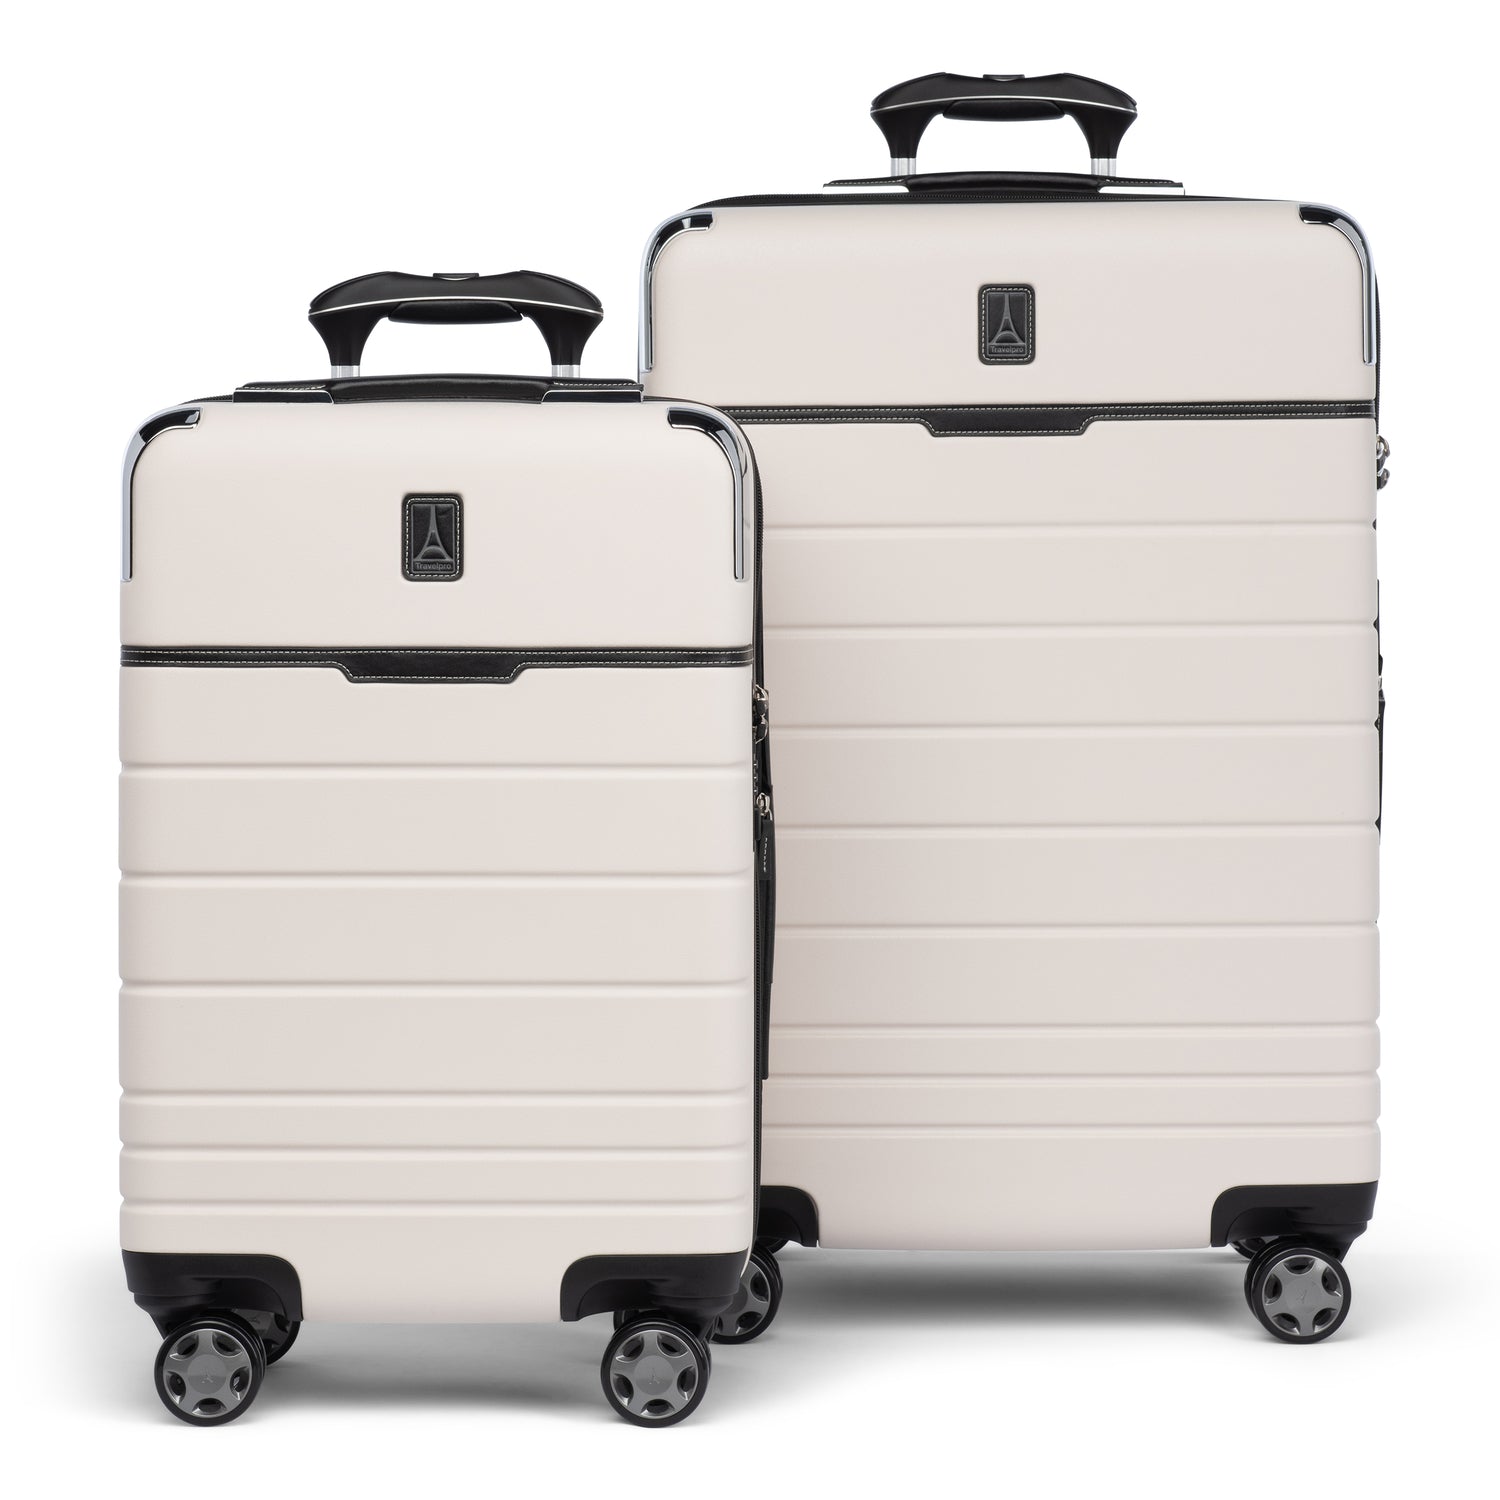 2 Check-in Type Luggage Bags available for sale - Other Household